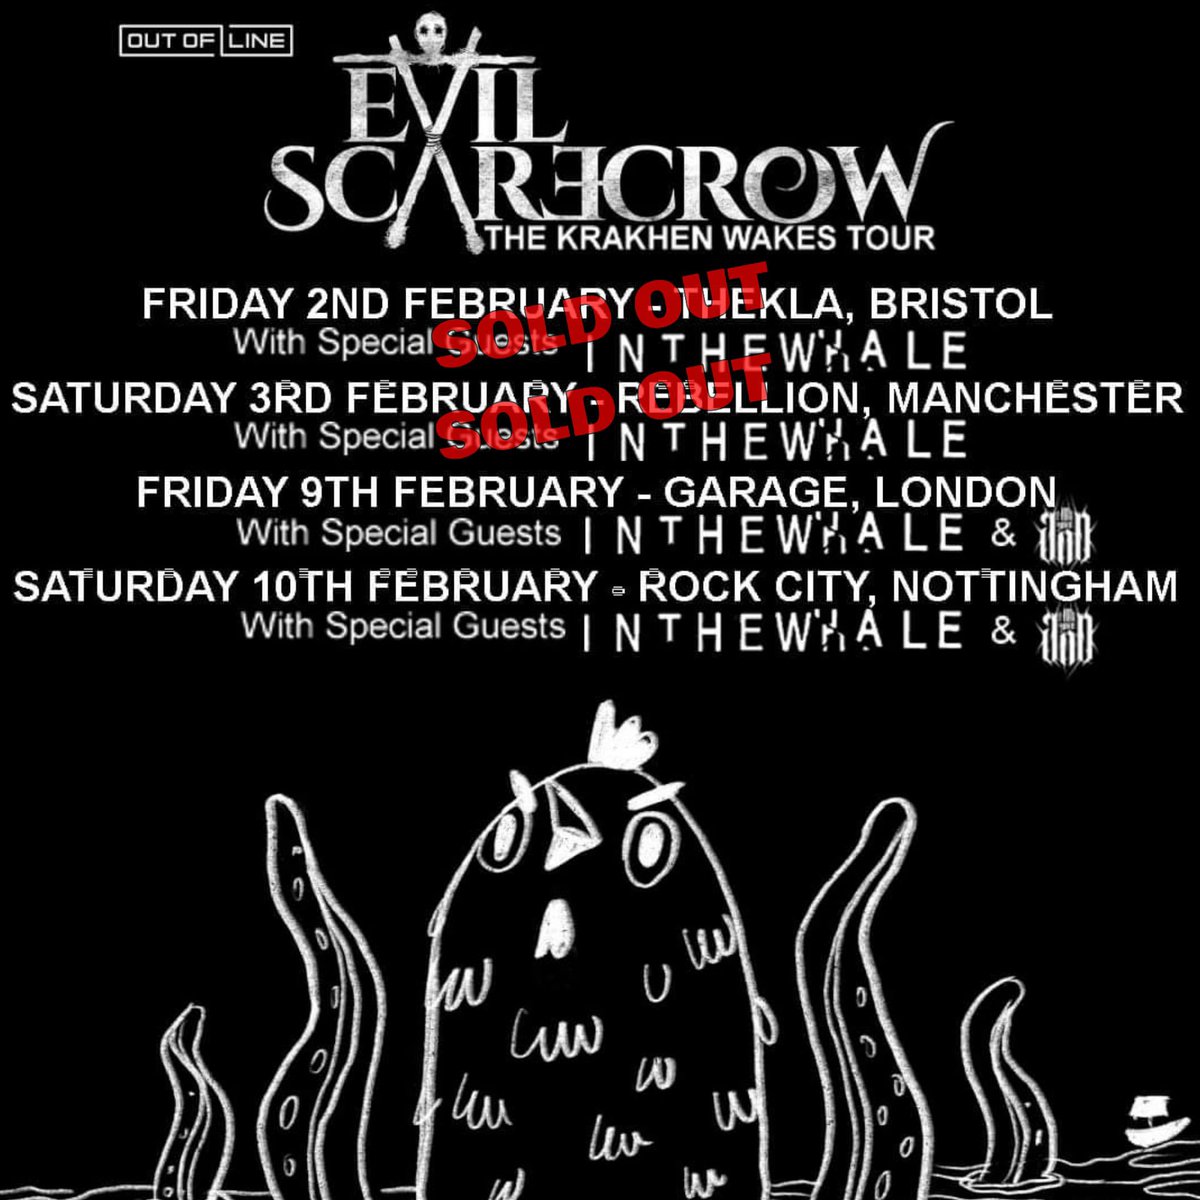 Expected set times for our sold out show at Rebellion tonight: Doors: 6:30pm @inthewhale: 7:30pm @EvilScarecrowUK: 8:40pm